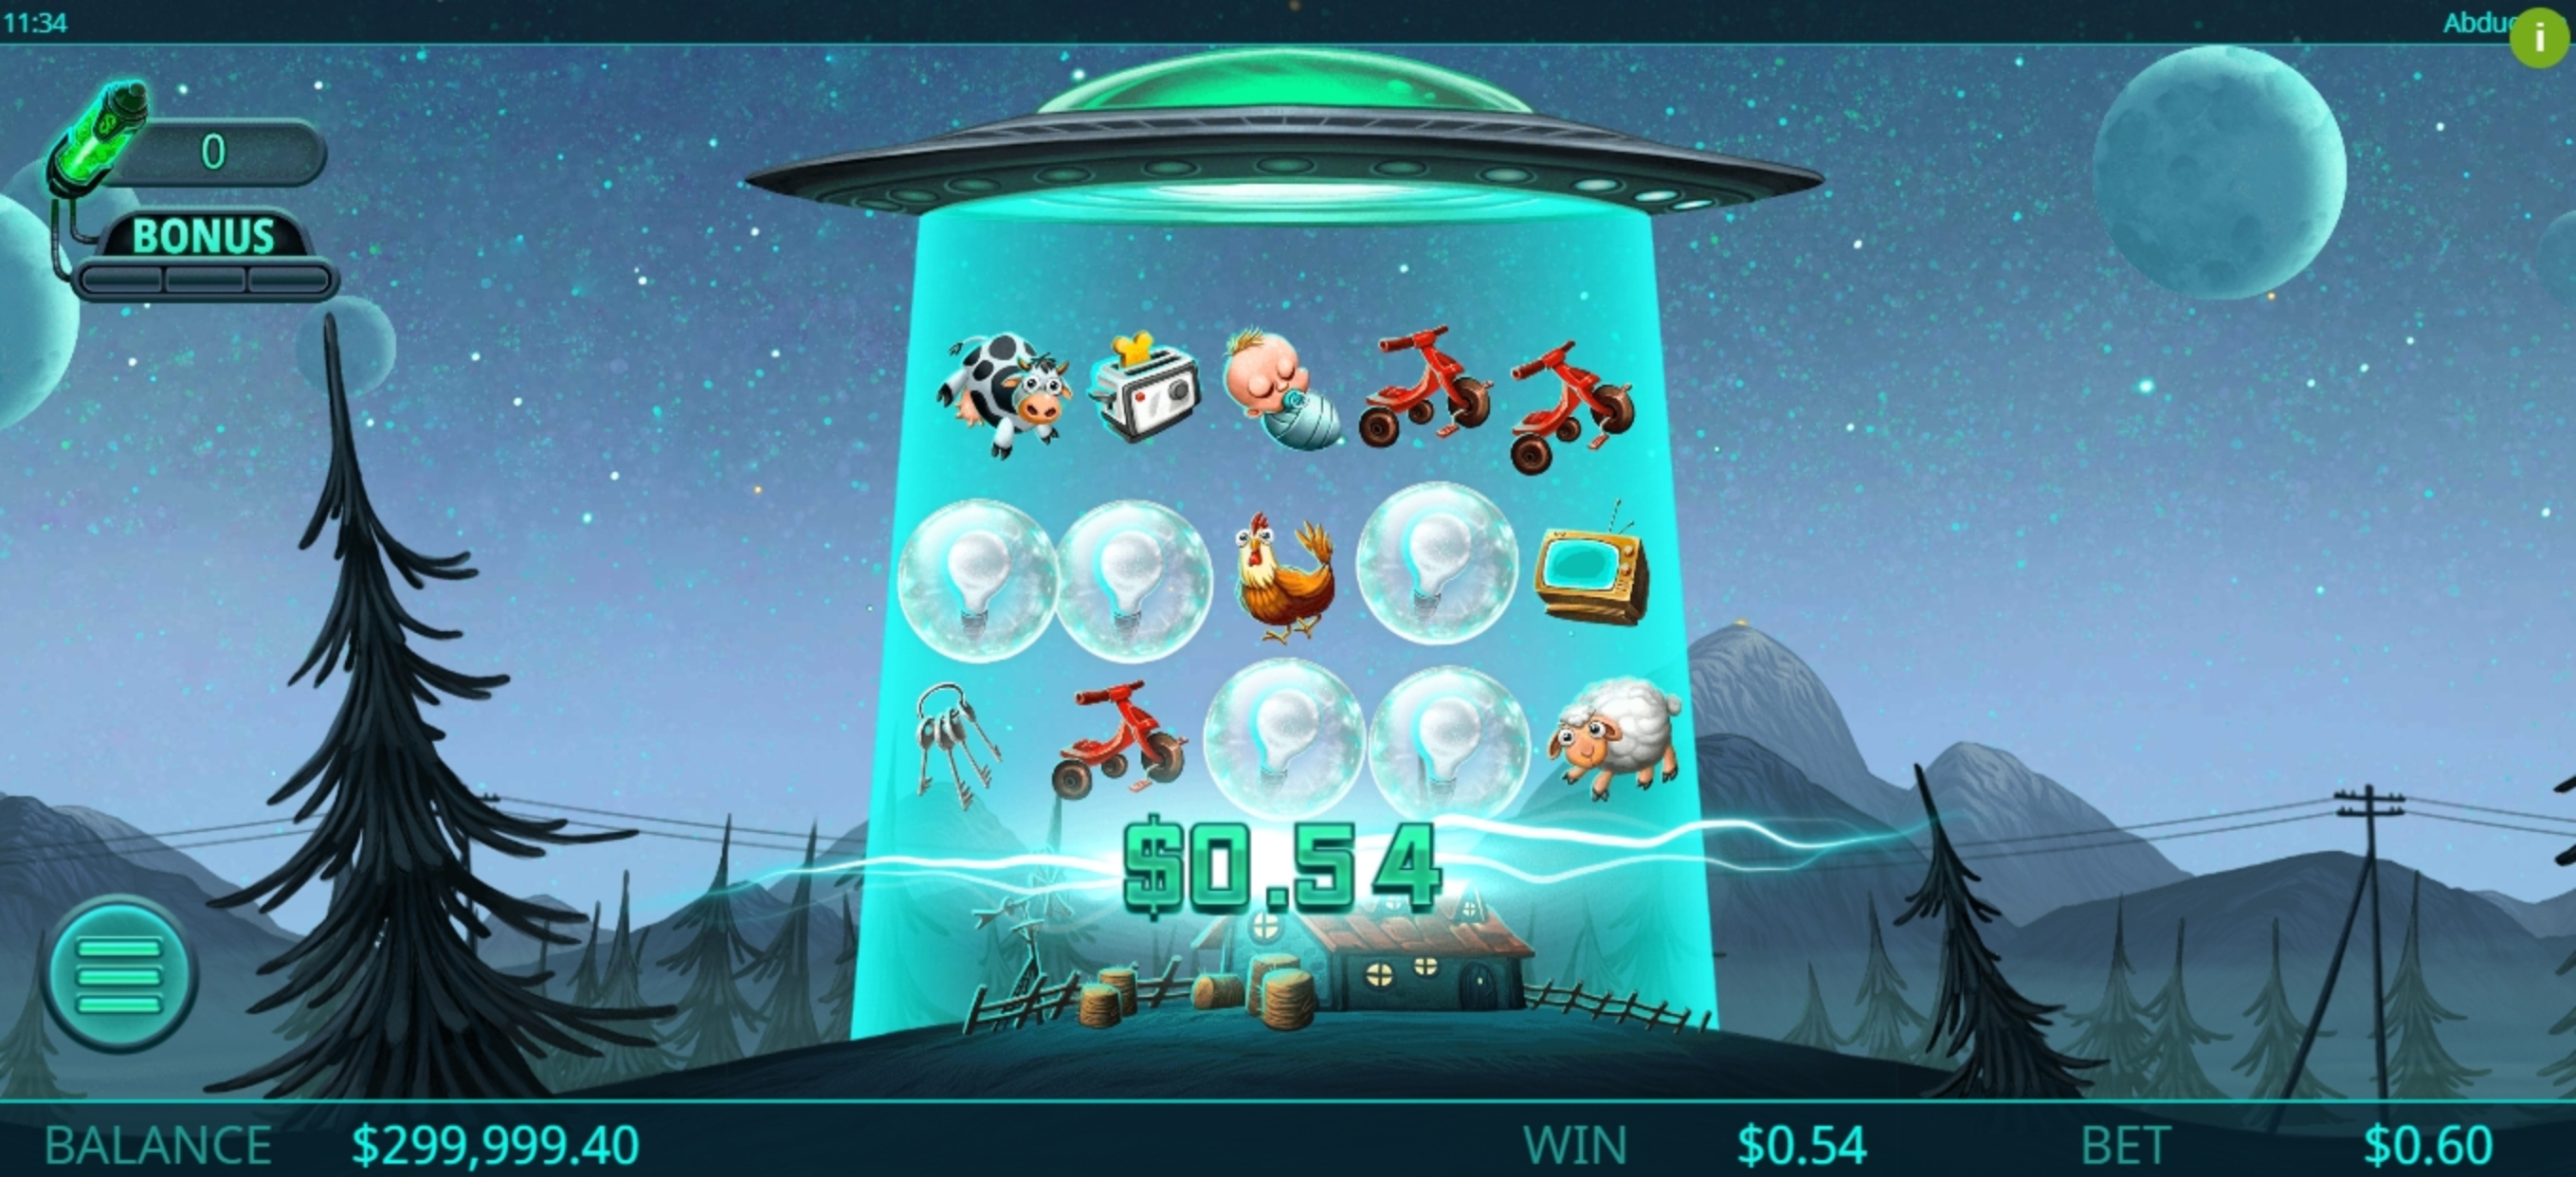 Win Money in Abduction Free Slot Game by Ganapati